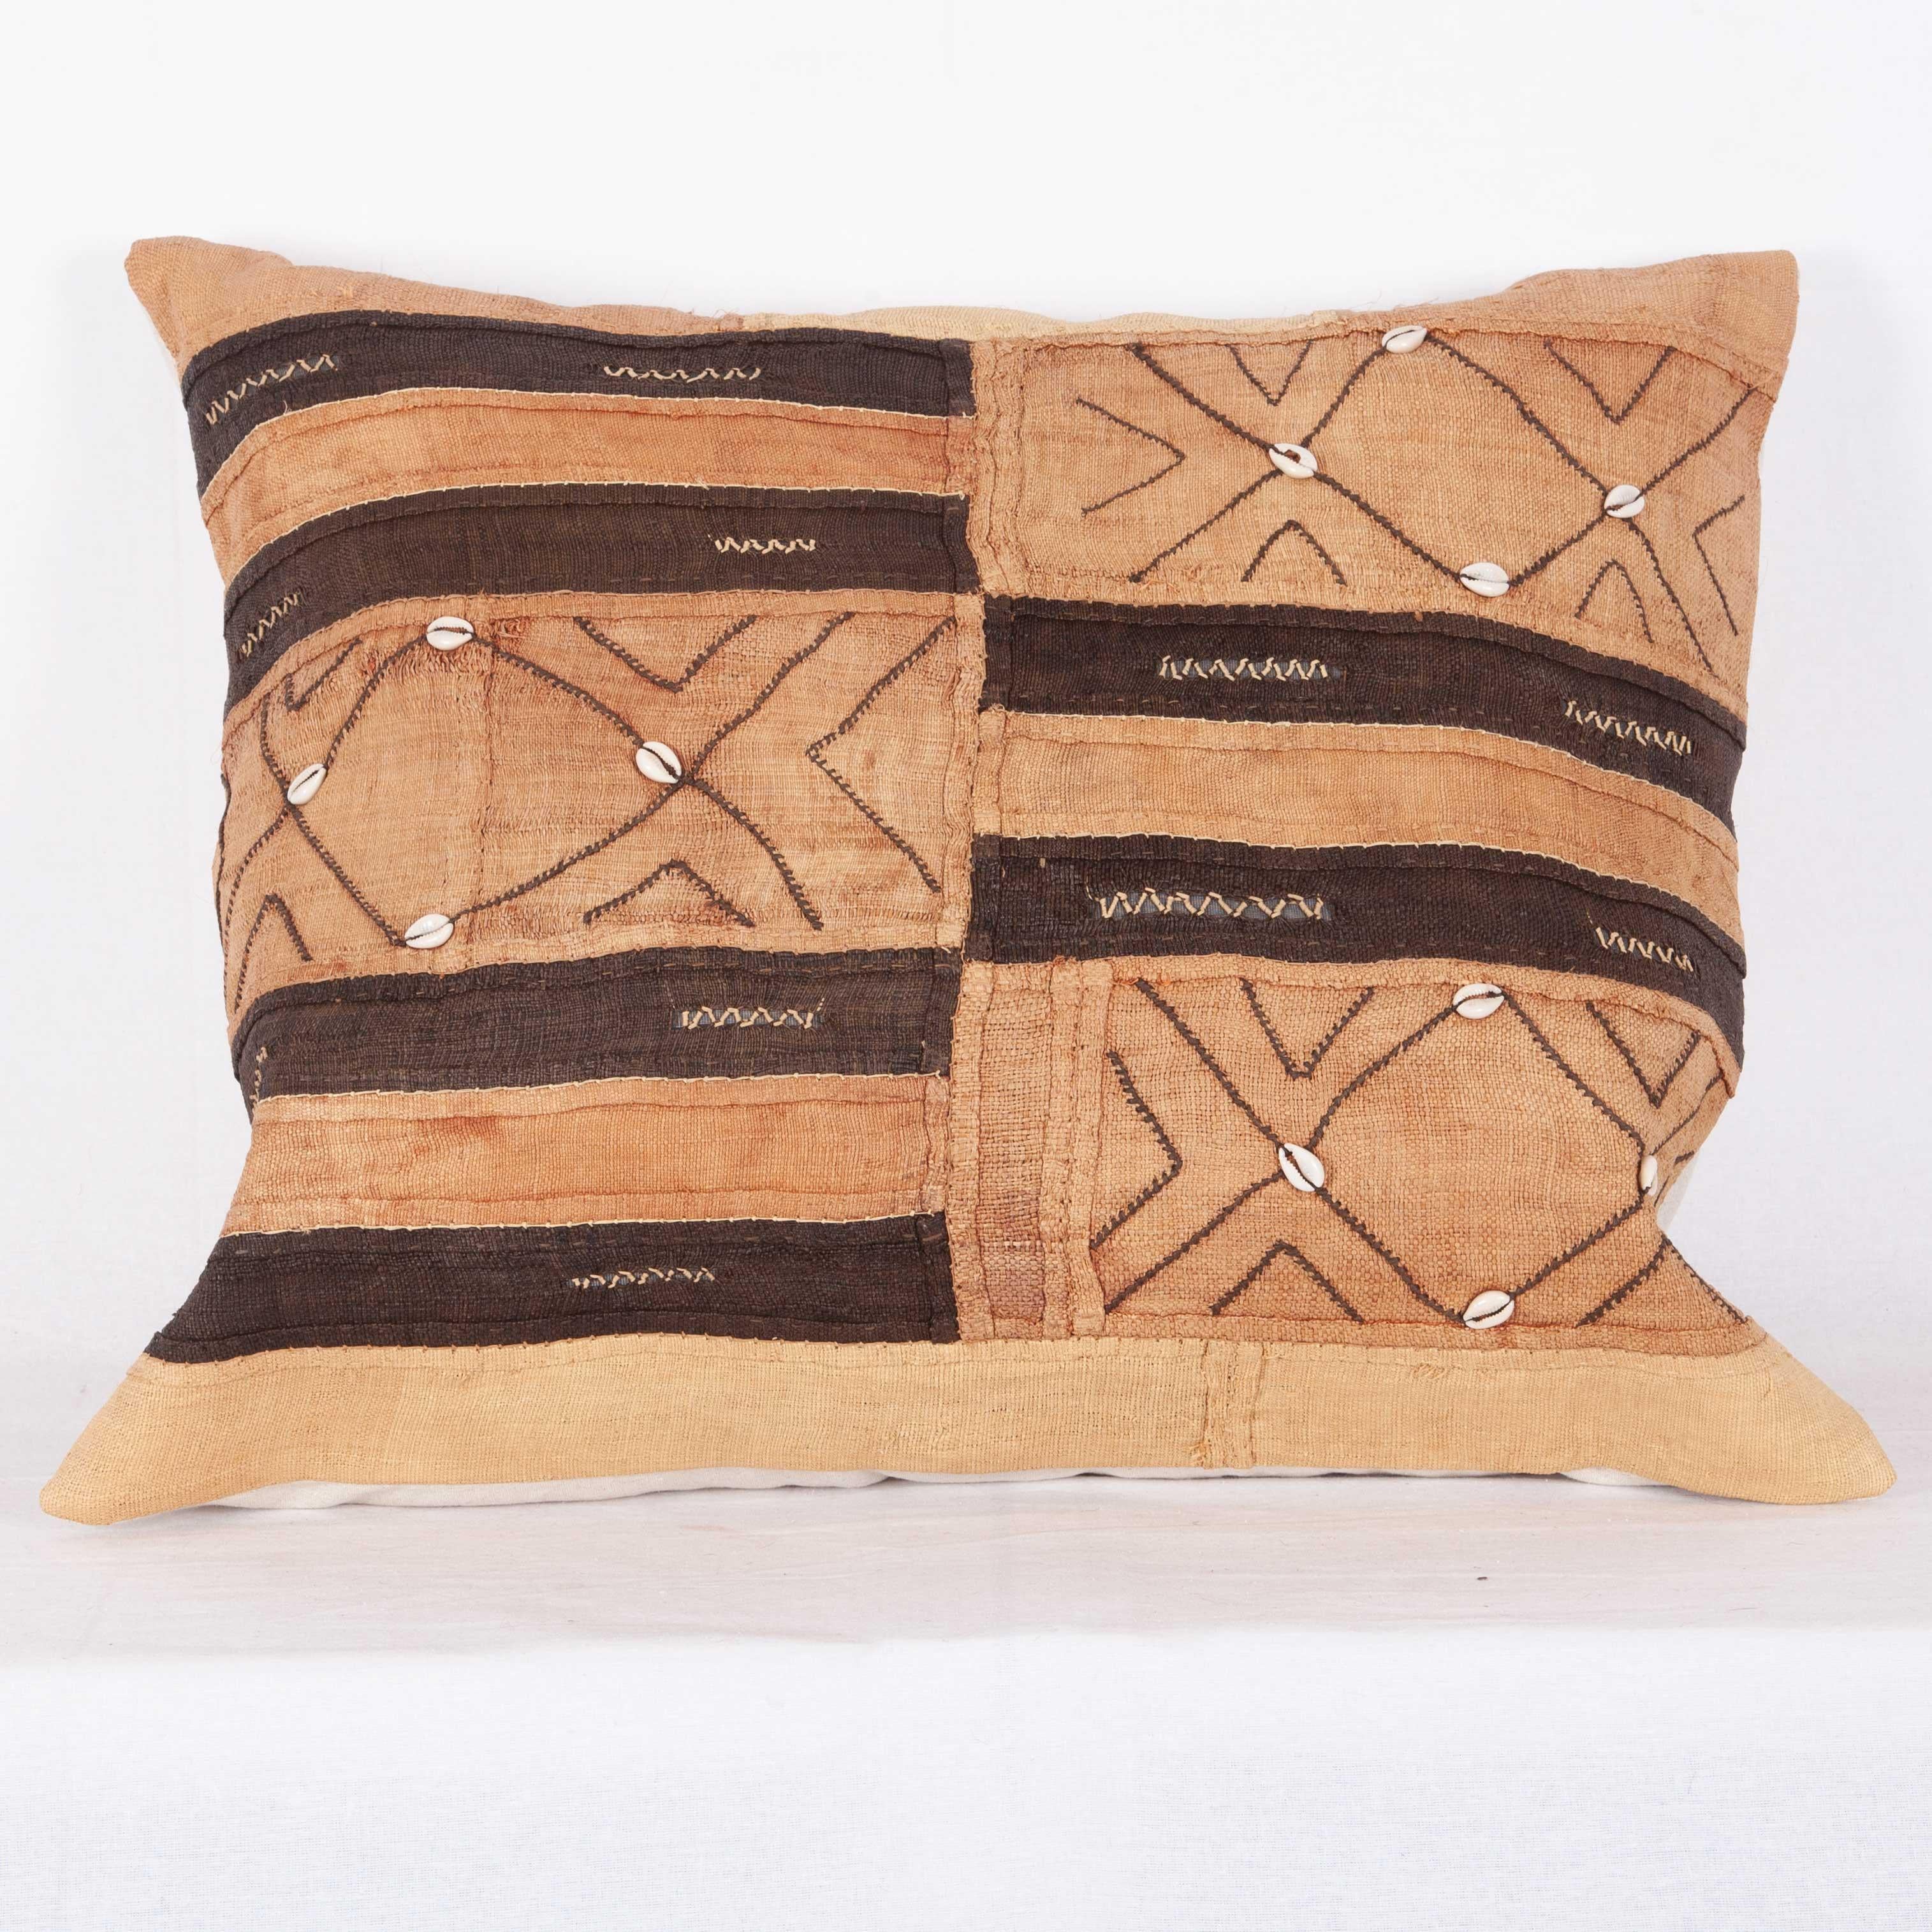 Vintage African Kuba Cloth Pillow Cases, Mid-20th Century For Sale 4